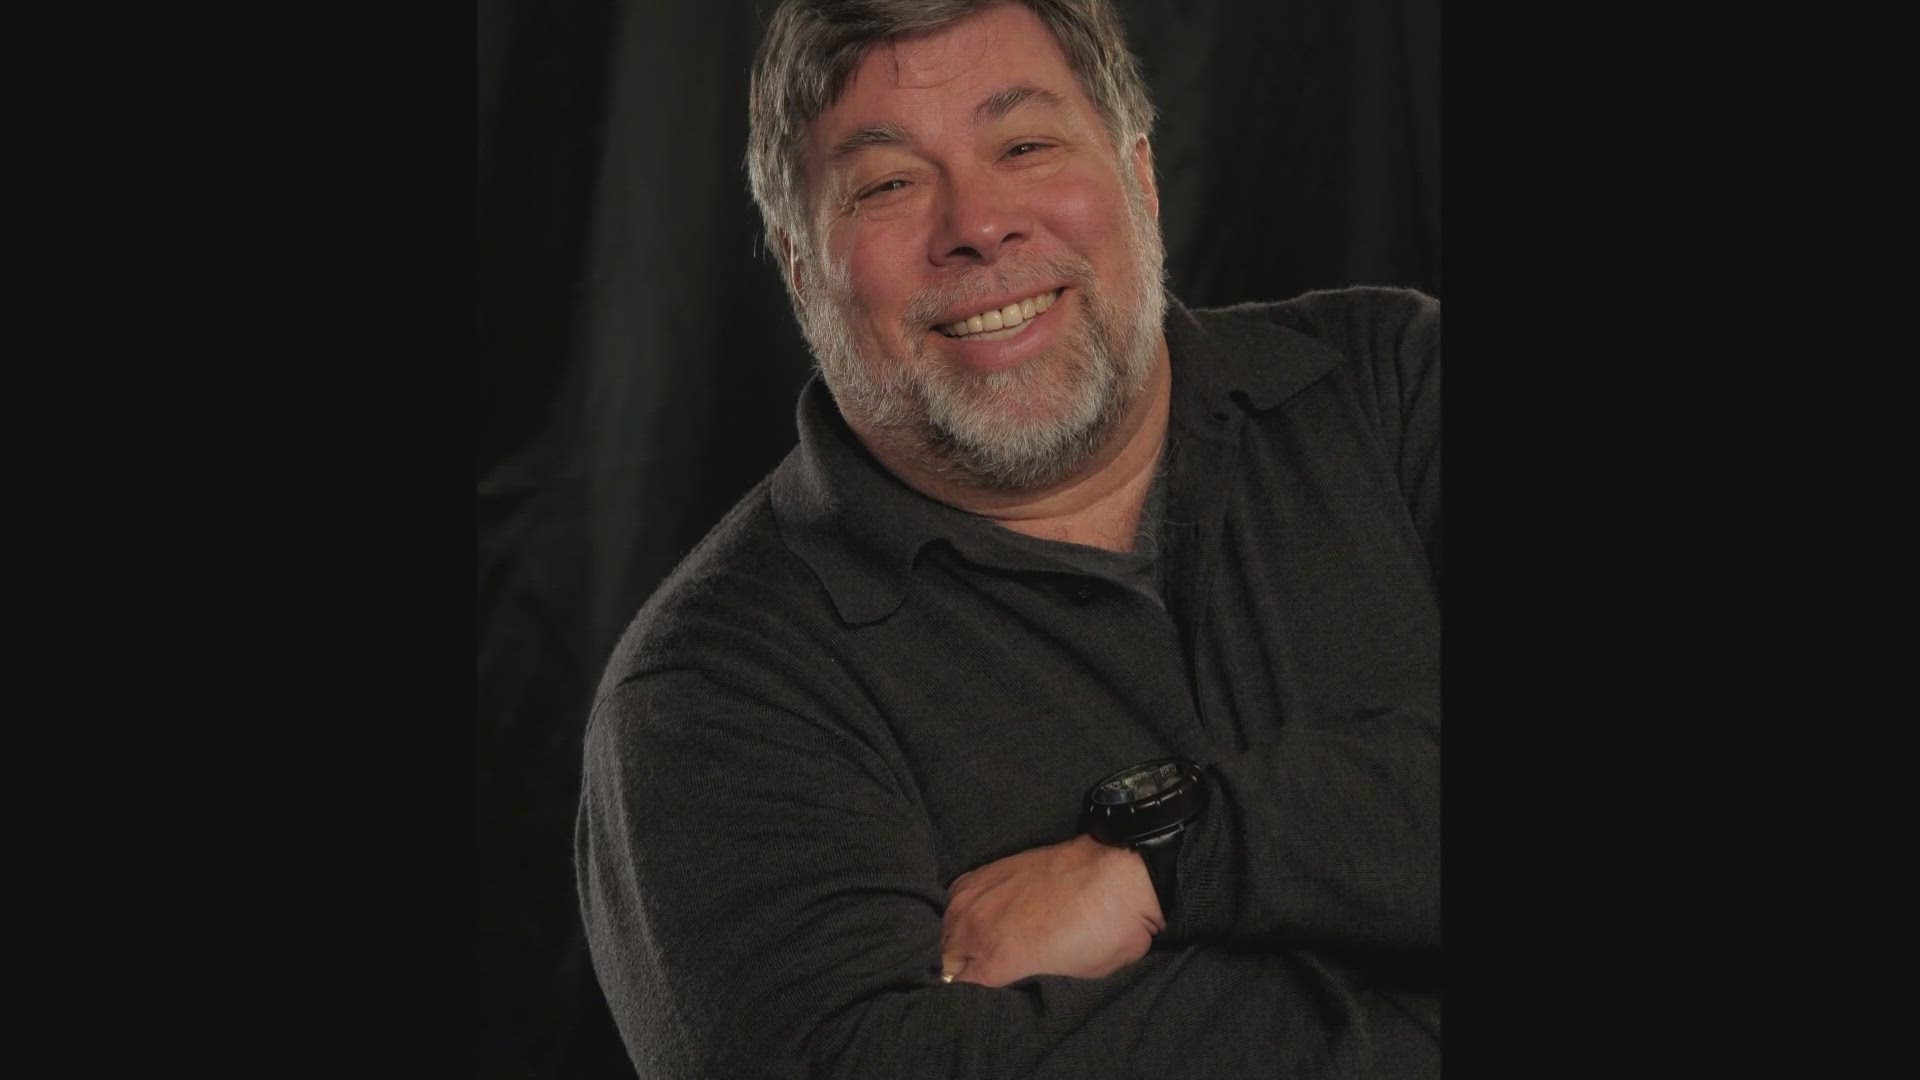 Wozniak holds an honorary doctorate in engineering from CU.